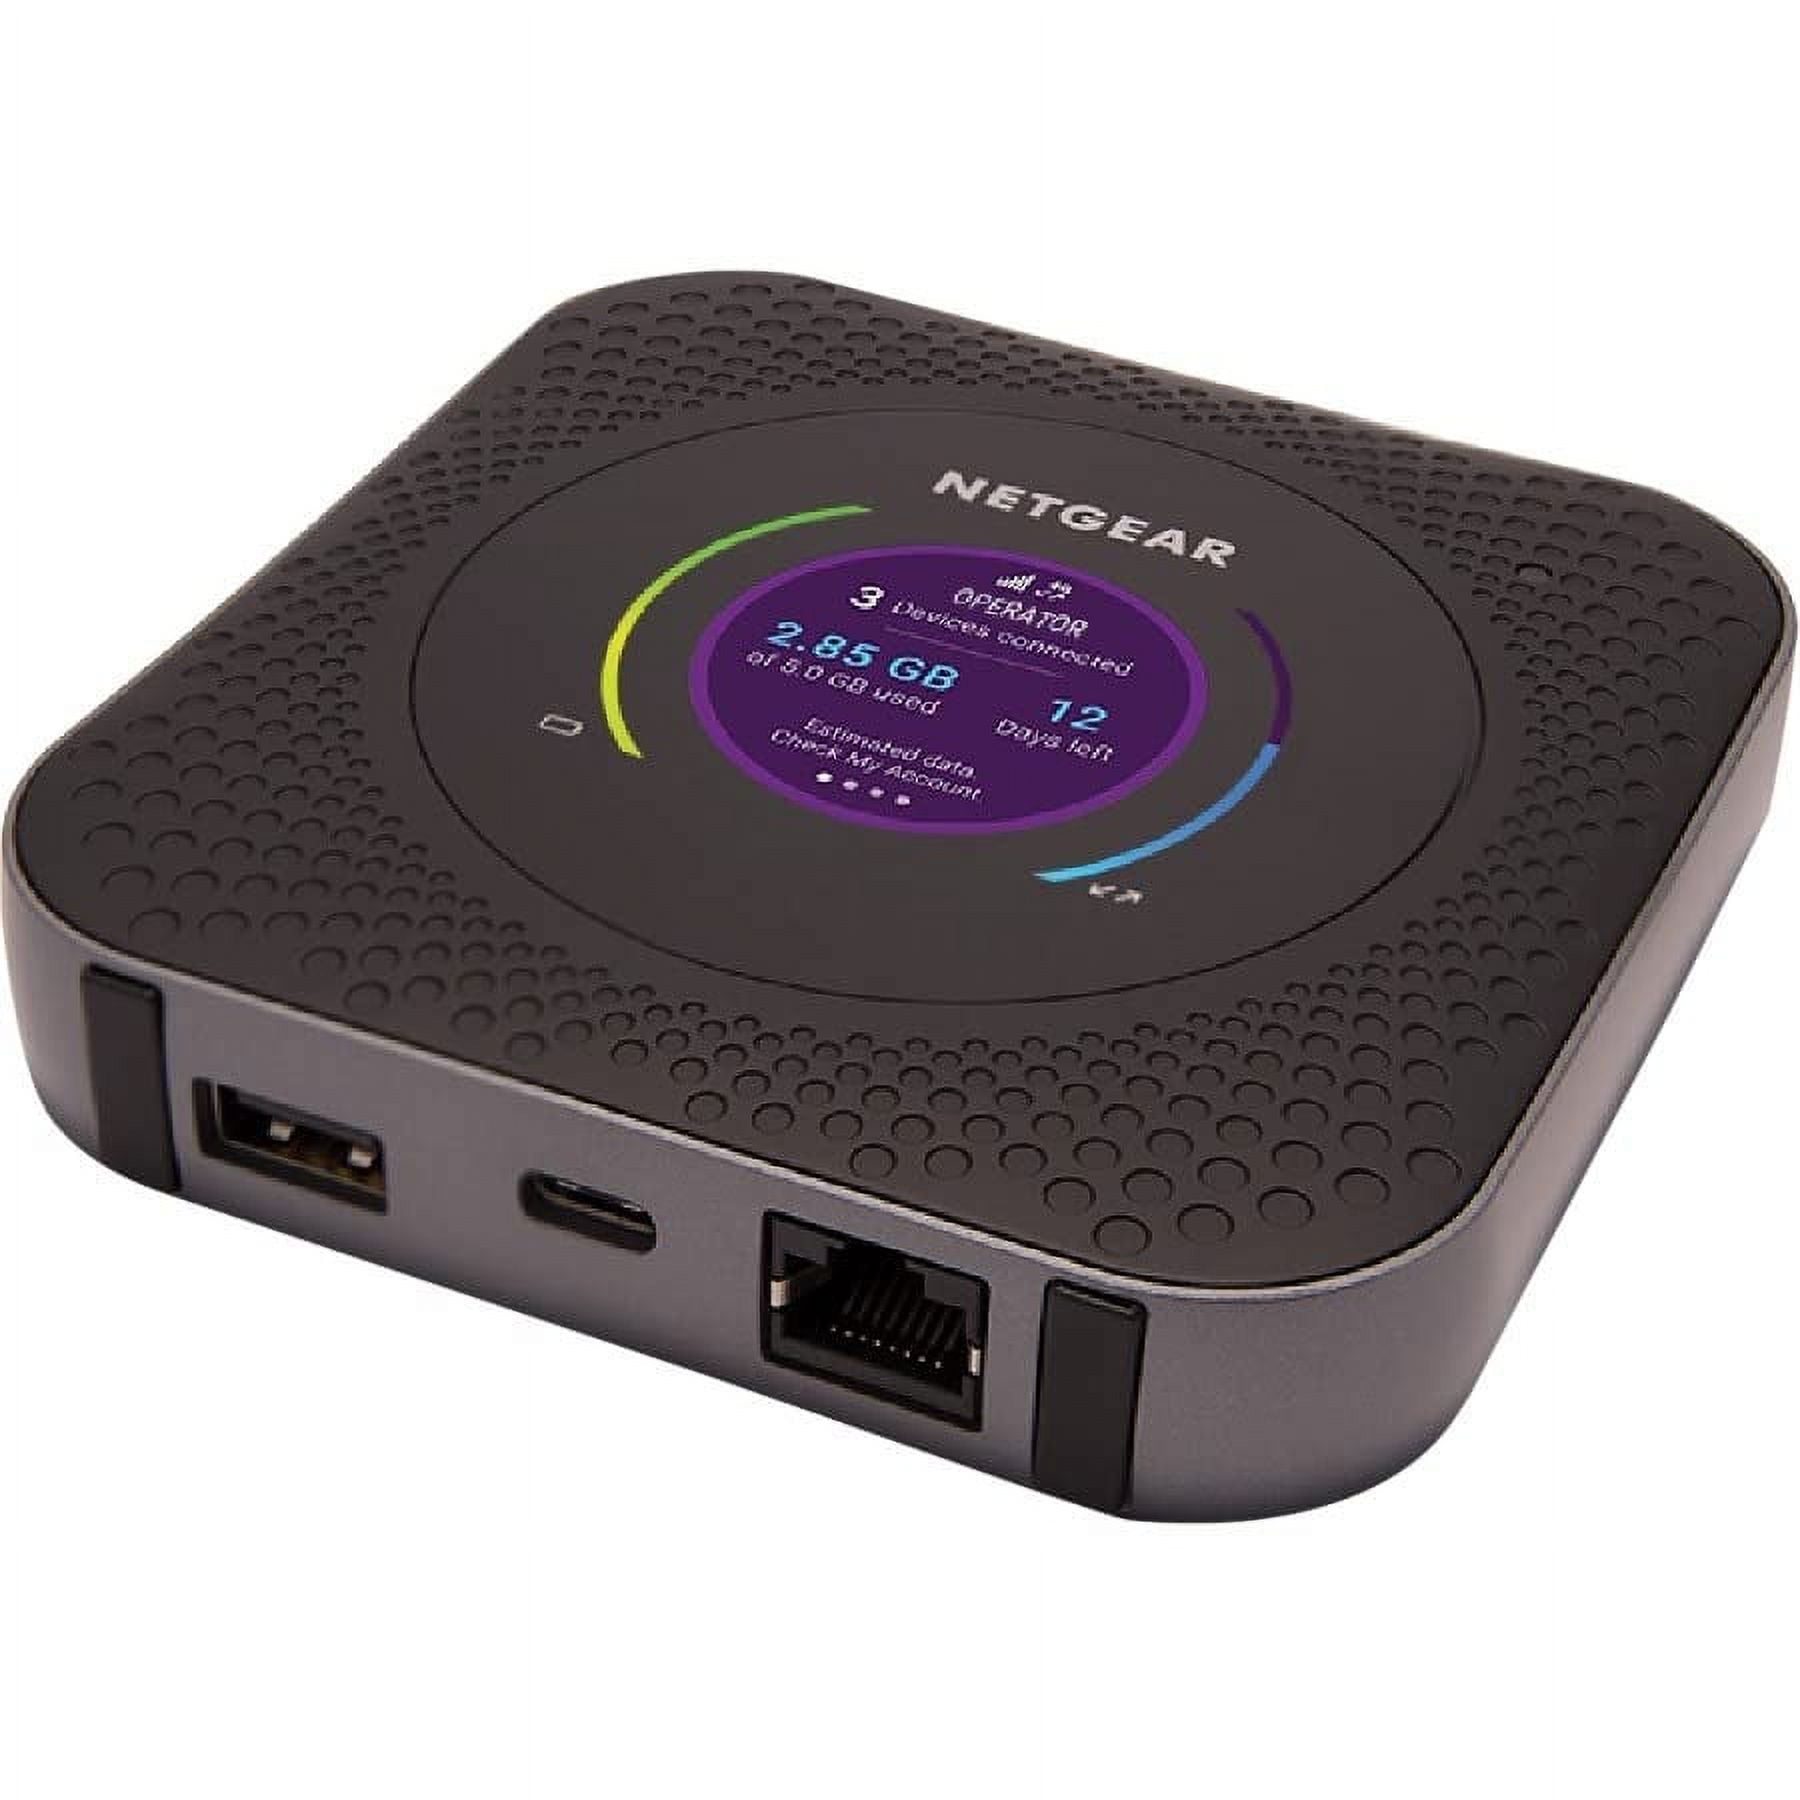 Marine Forstå trolley bus NETGEAR Nighthawk M1 4G LTE WiFi Mobile Hotspot (MR1100-100NAS) - Up to  1Gbps Speed, Works Best with AT&T and T-Mobile, Connects Up to 20 Devices,  Secure Wireless Network Anywhere - Walmart.com